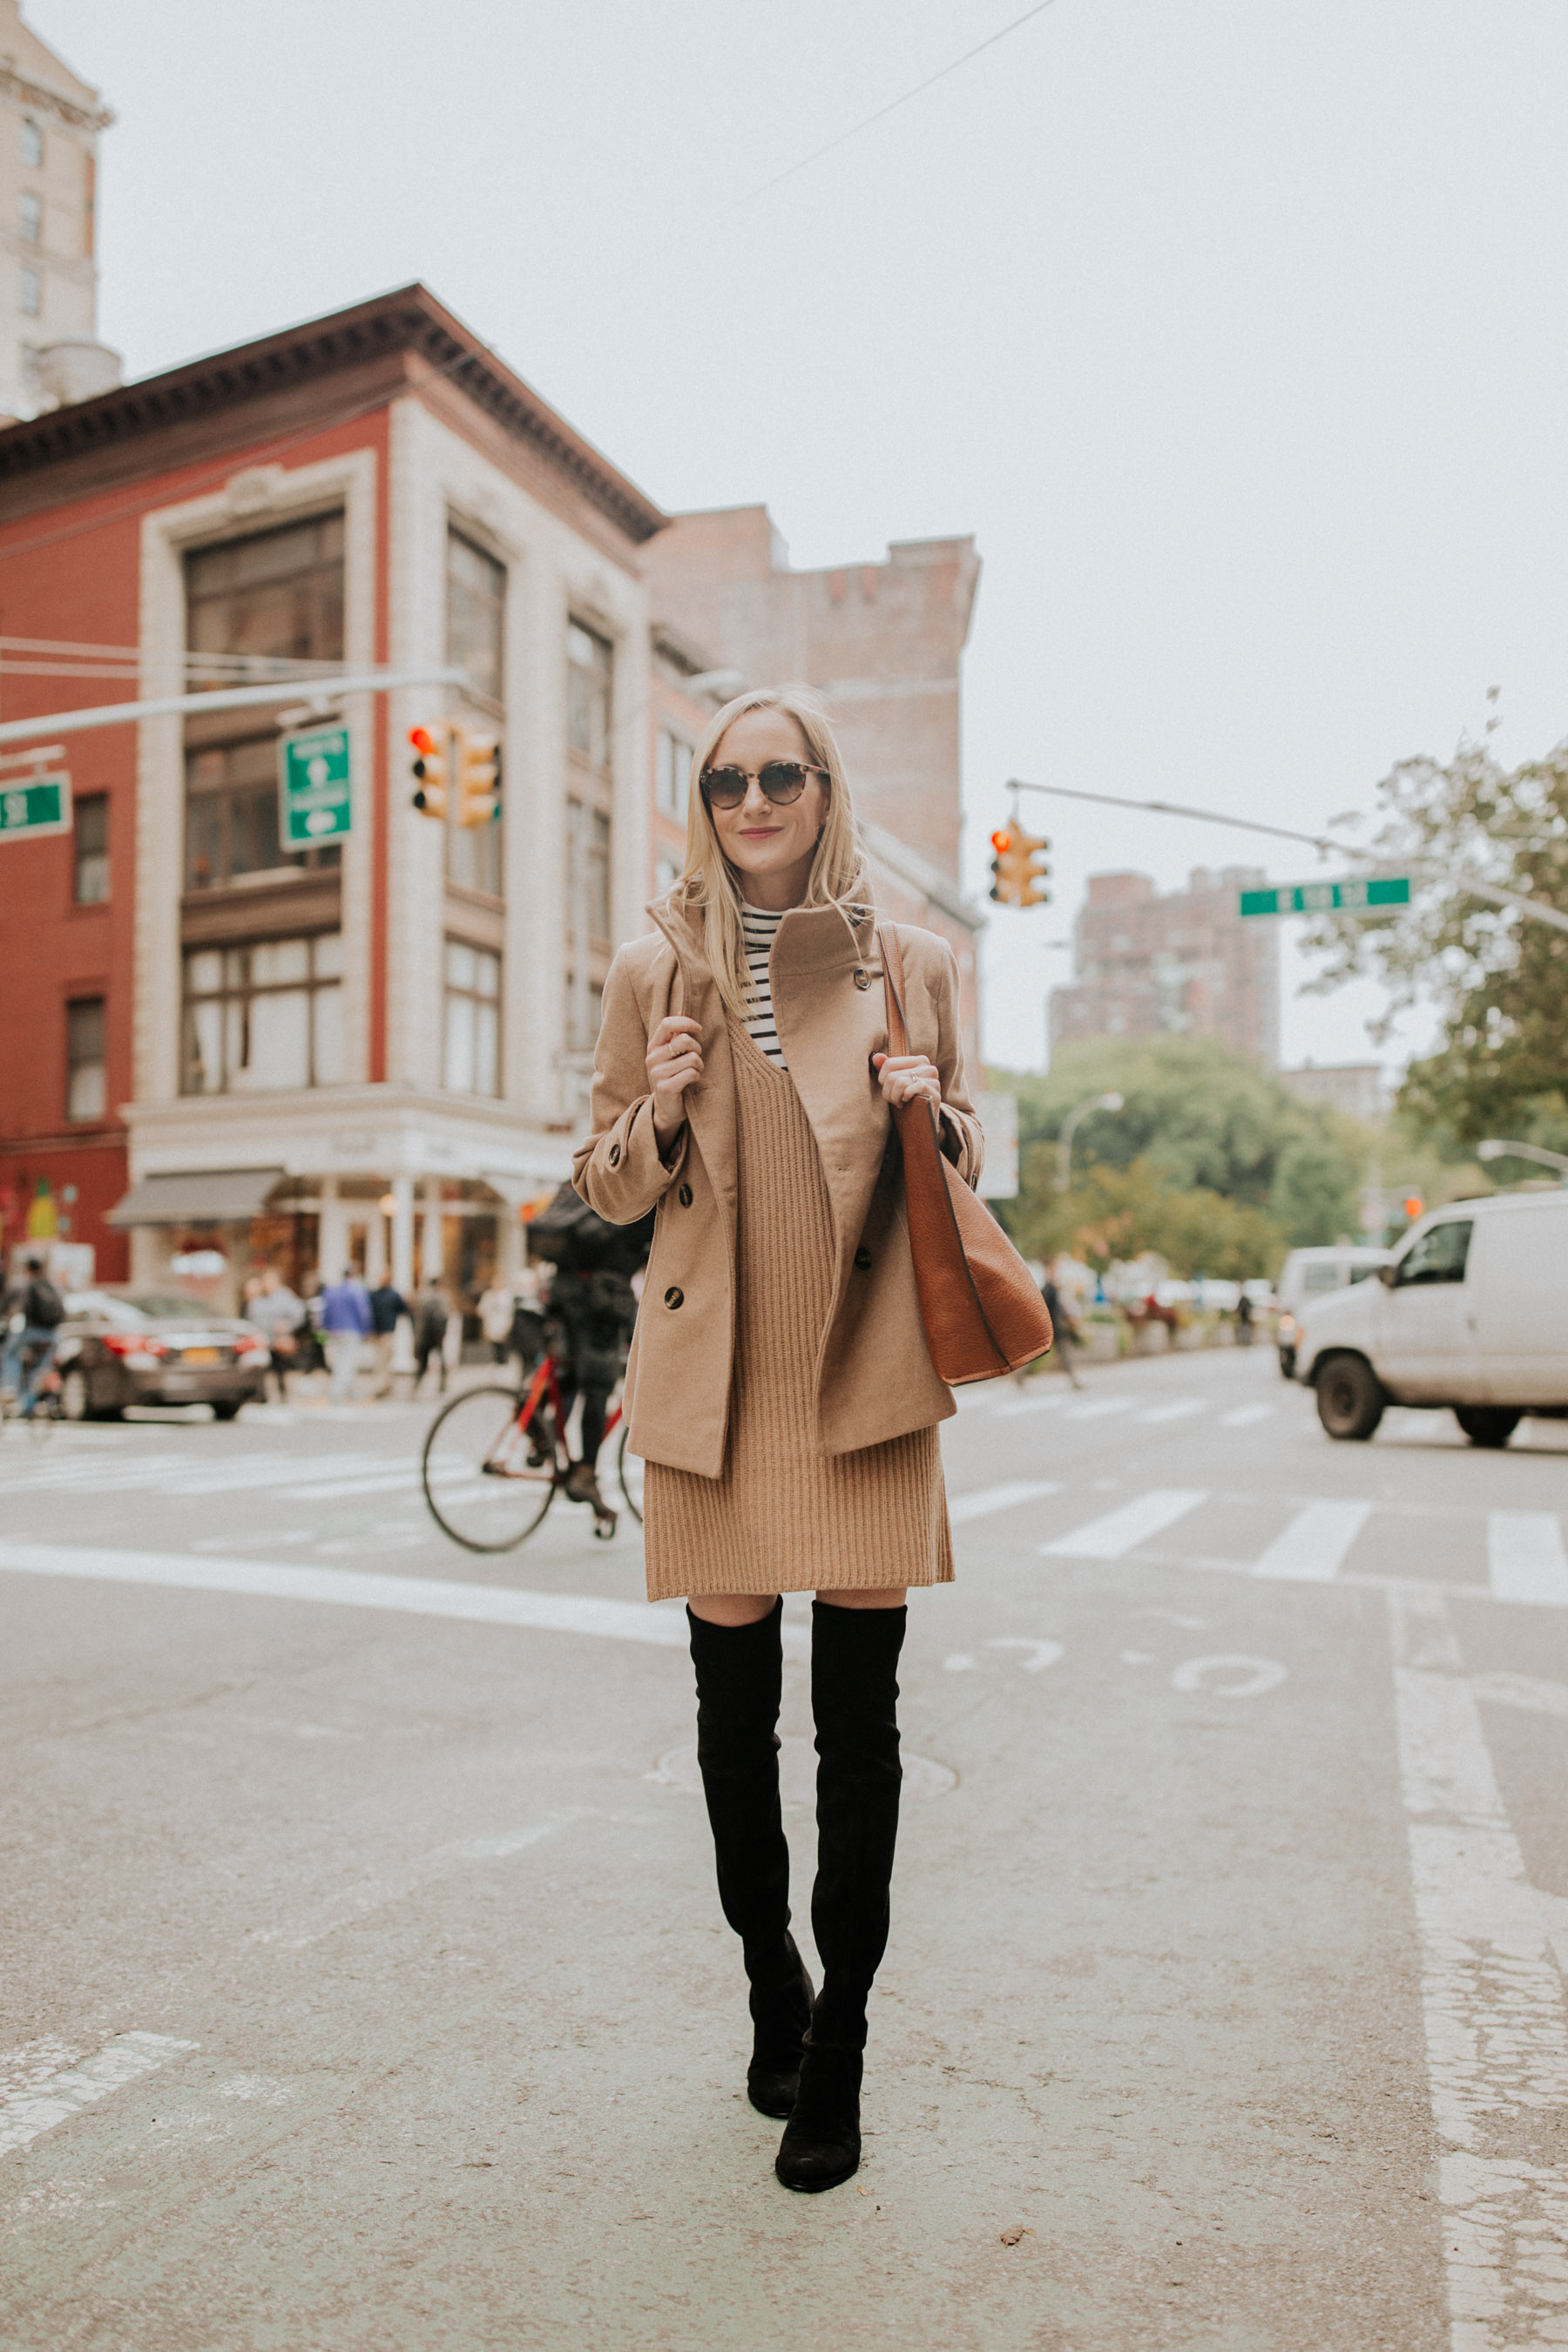 $38 Peacoat / Camel Sweater Dress / $49 Faux Leather Tote / Stuart Weitzman Boots